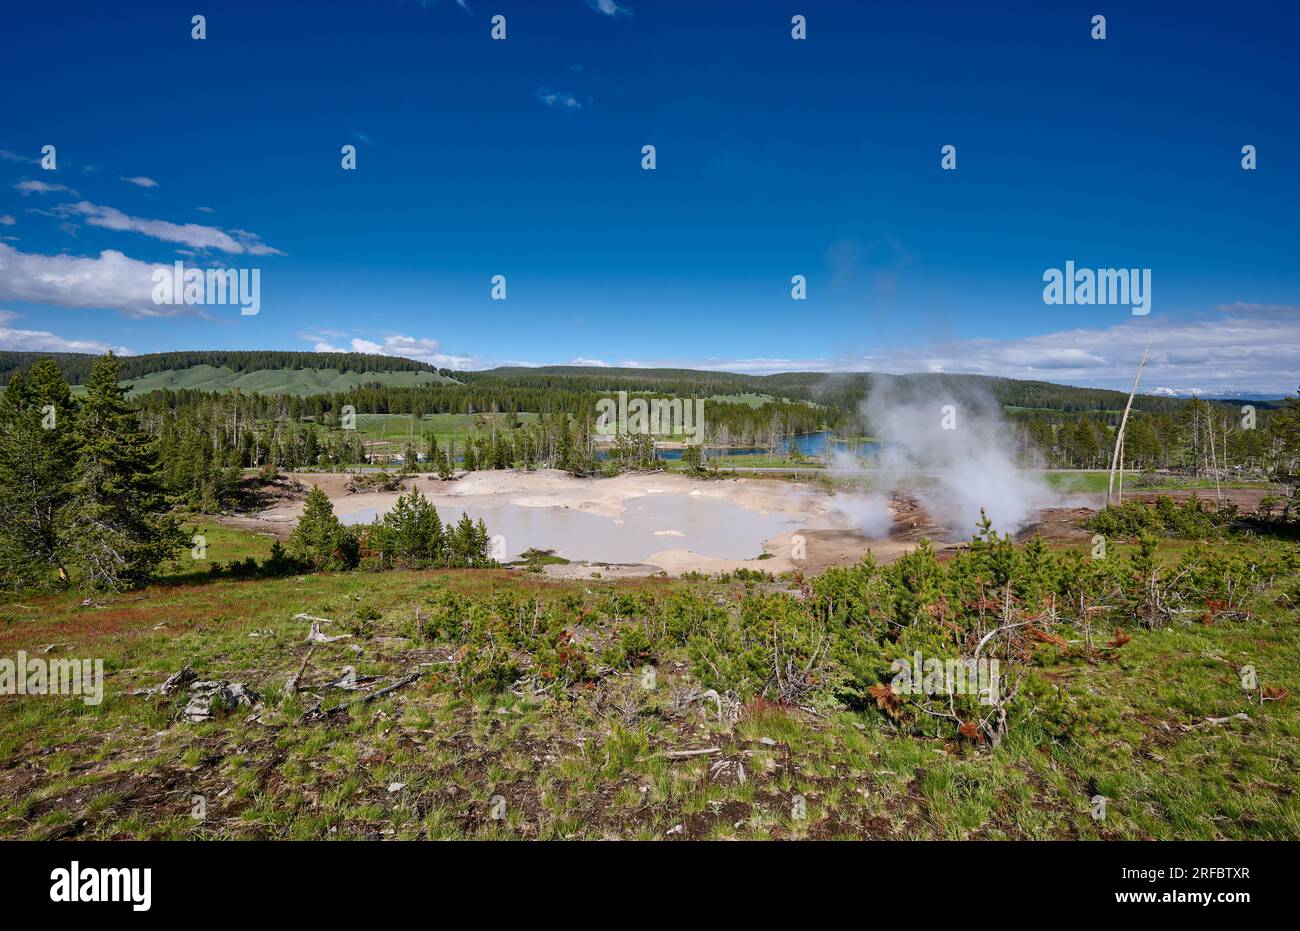 Cooking Hillside, Mud Volcano Area, Yellowstone National Park, Wyoming, United States of America Stock Photo